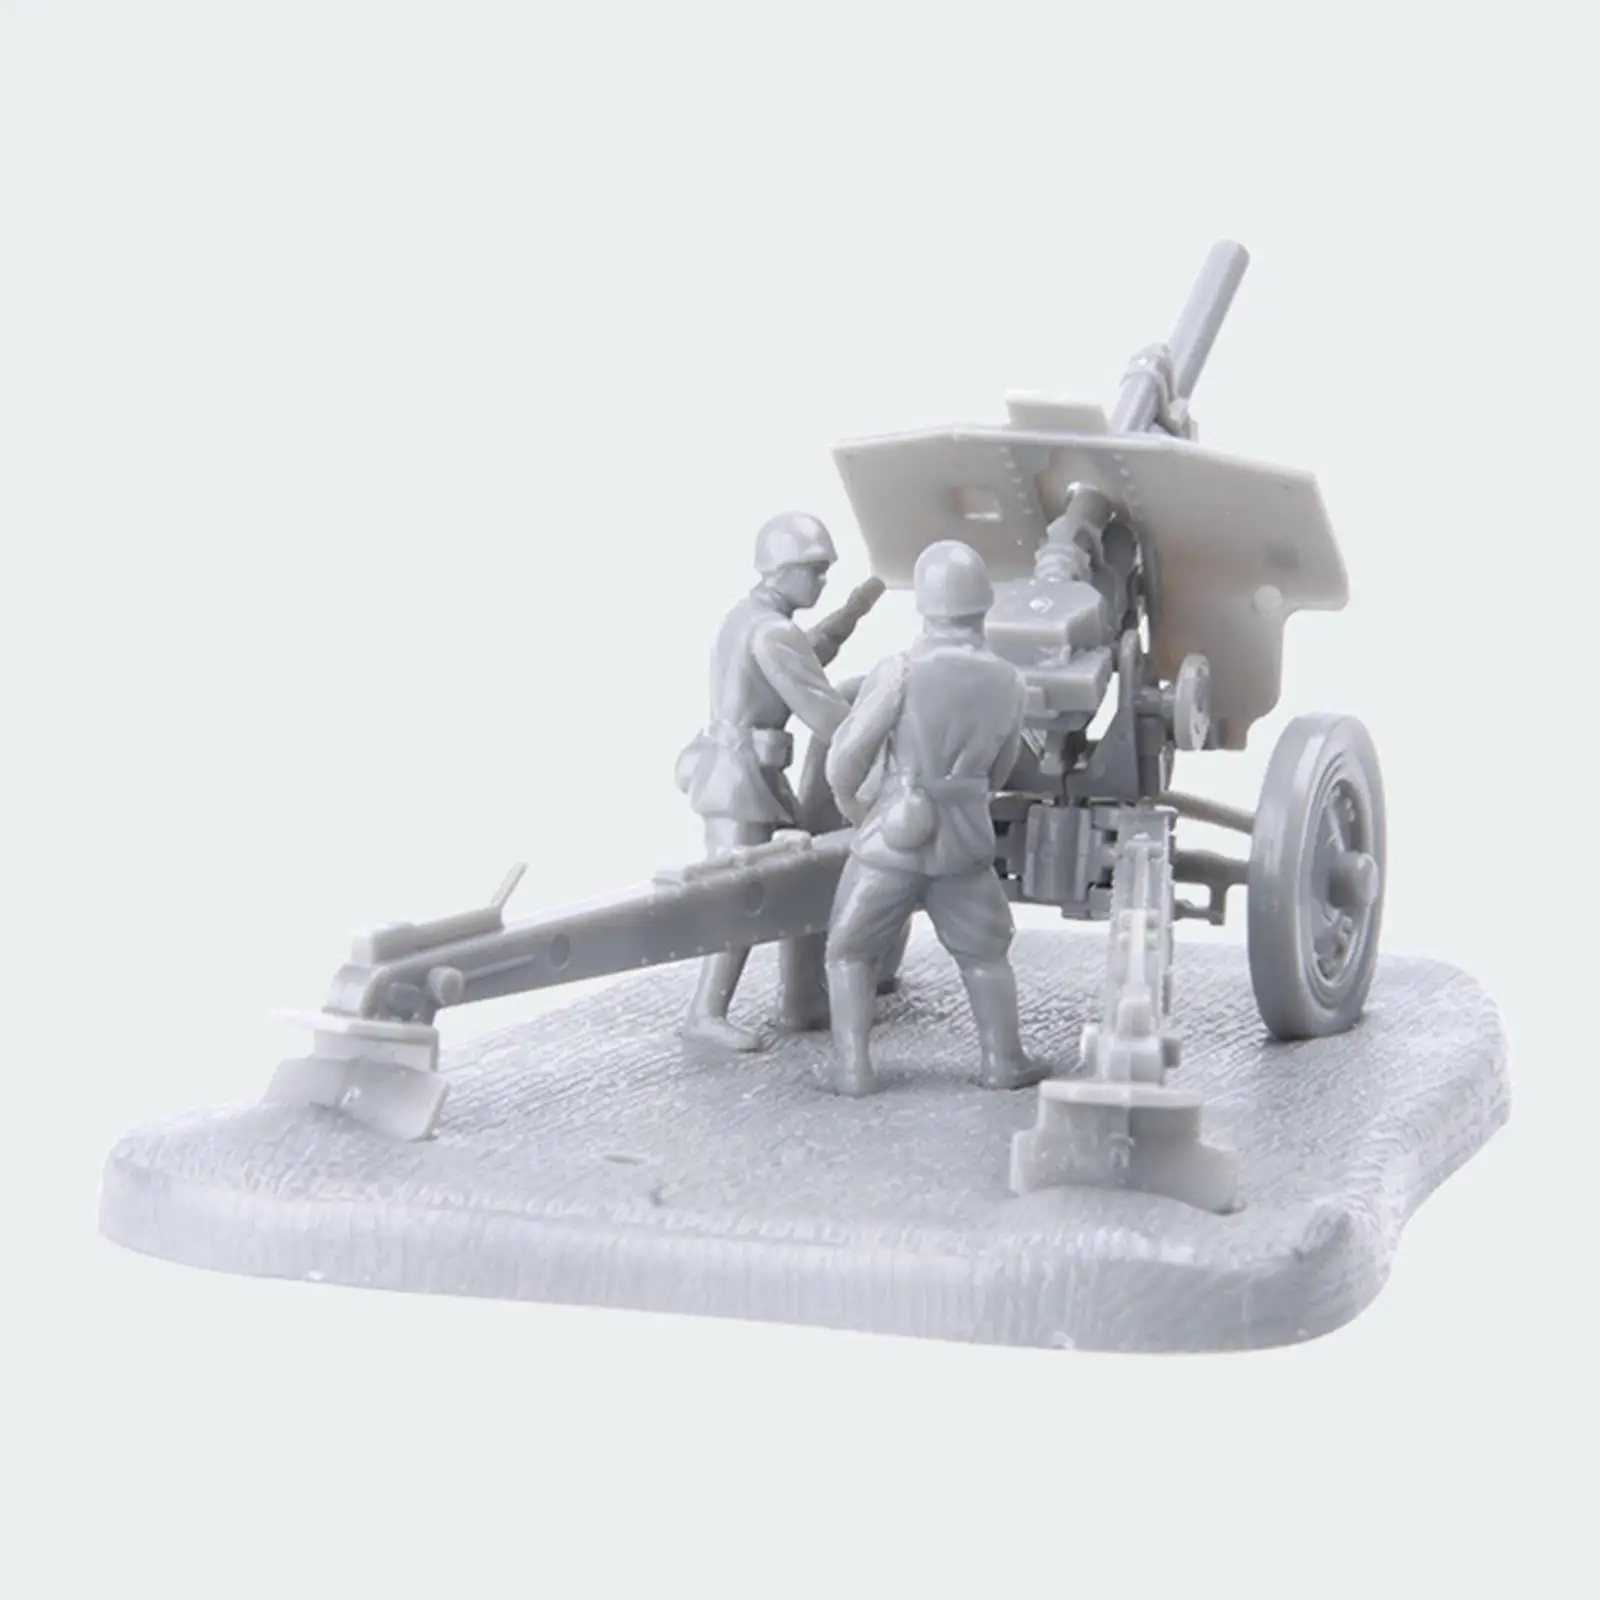 Wwii 1:72 Scenario M1938 Cannon Assembly Model Toy Surprise Gifts Holiday Gifts DIY